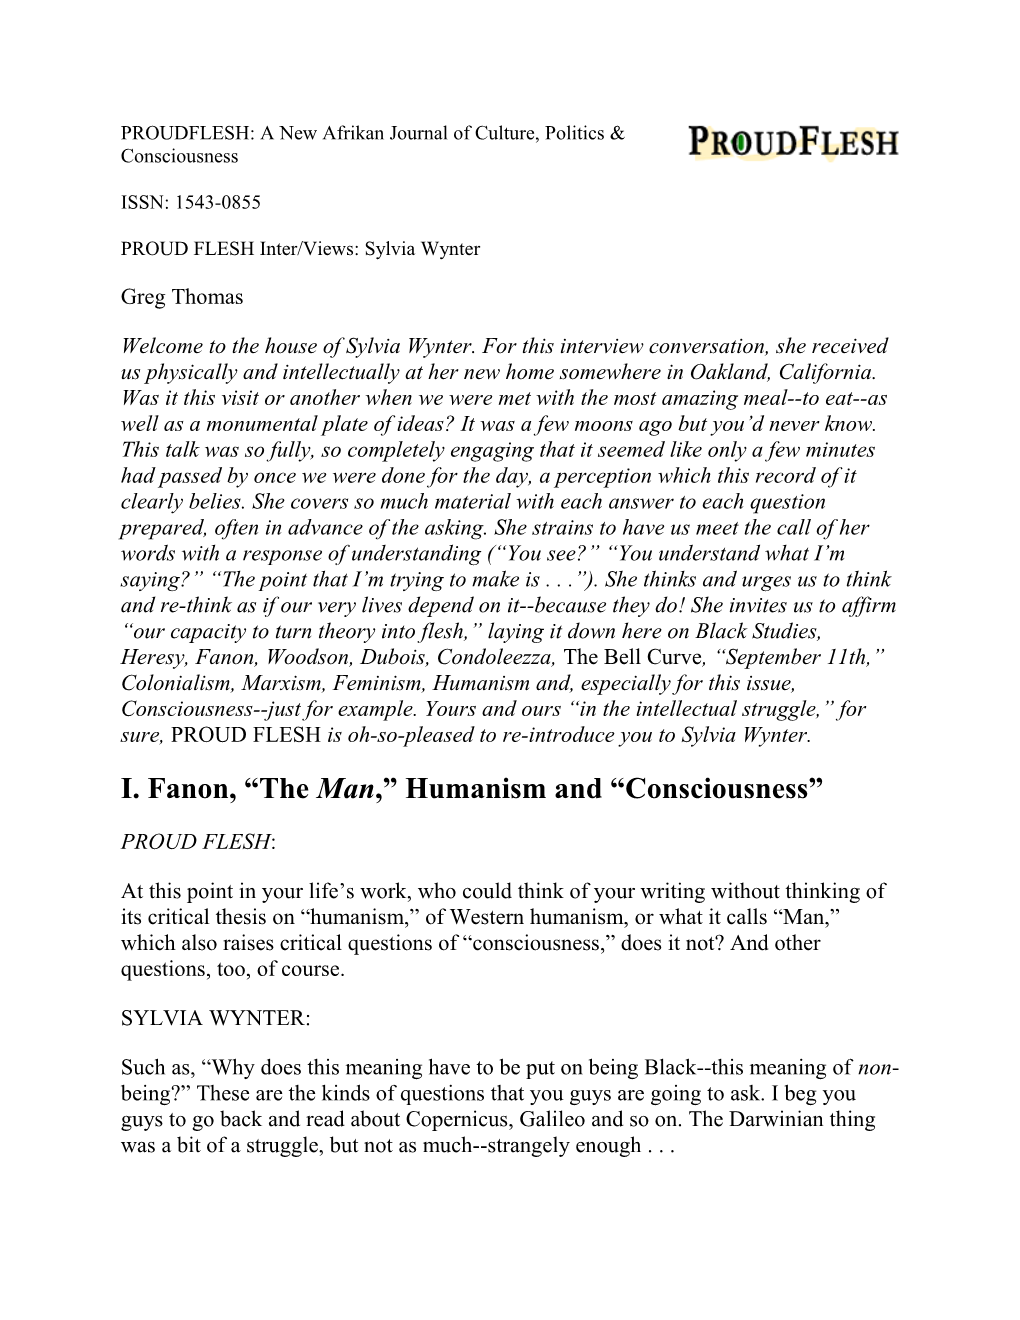 I. Fanon, Theman, Humanism and Consciousness